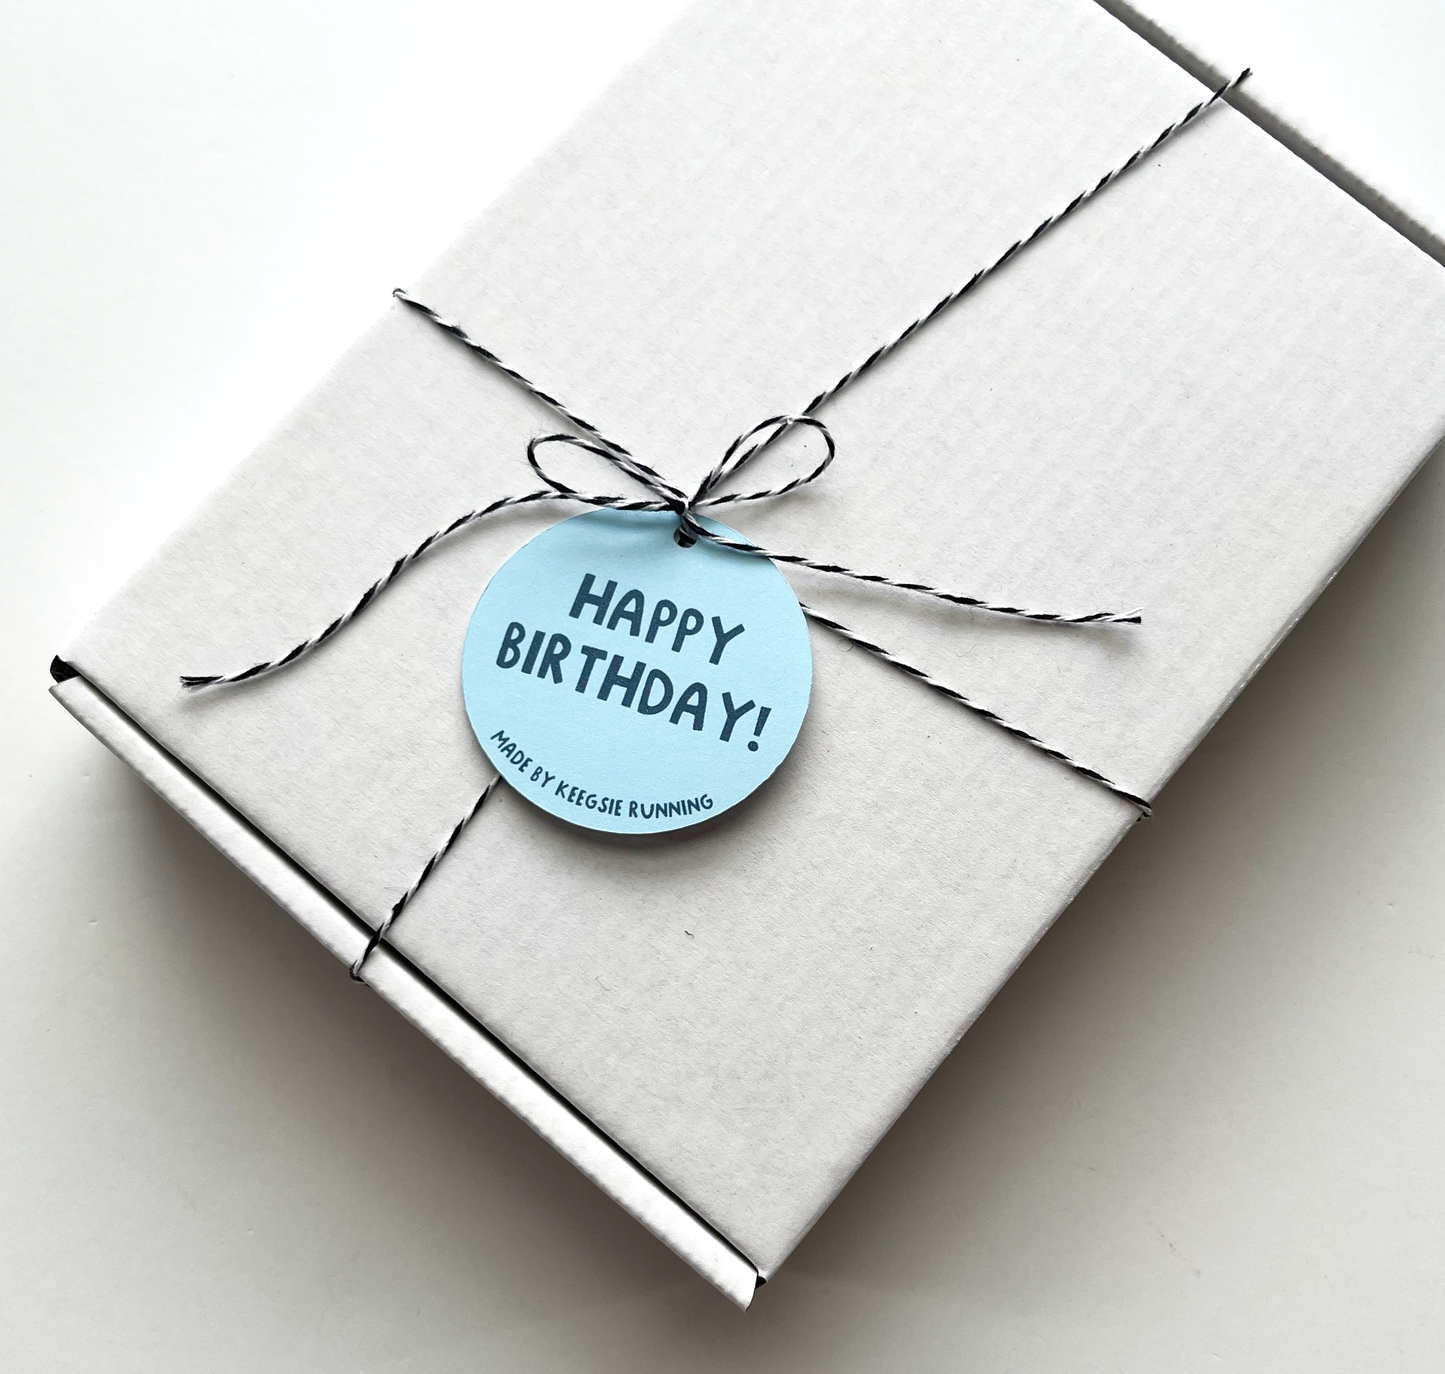 white closed gift box tied with twine and happy birthday tag